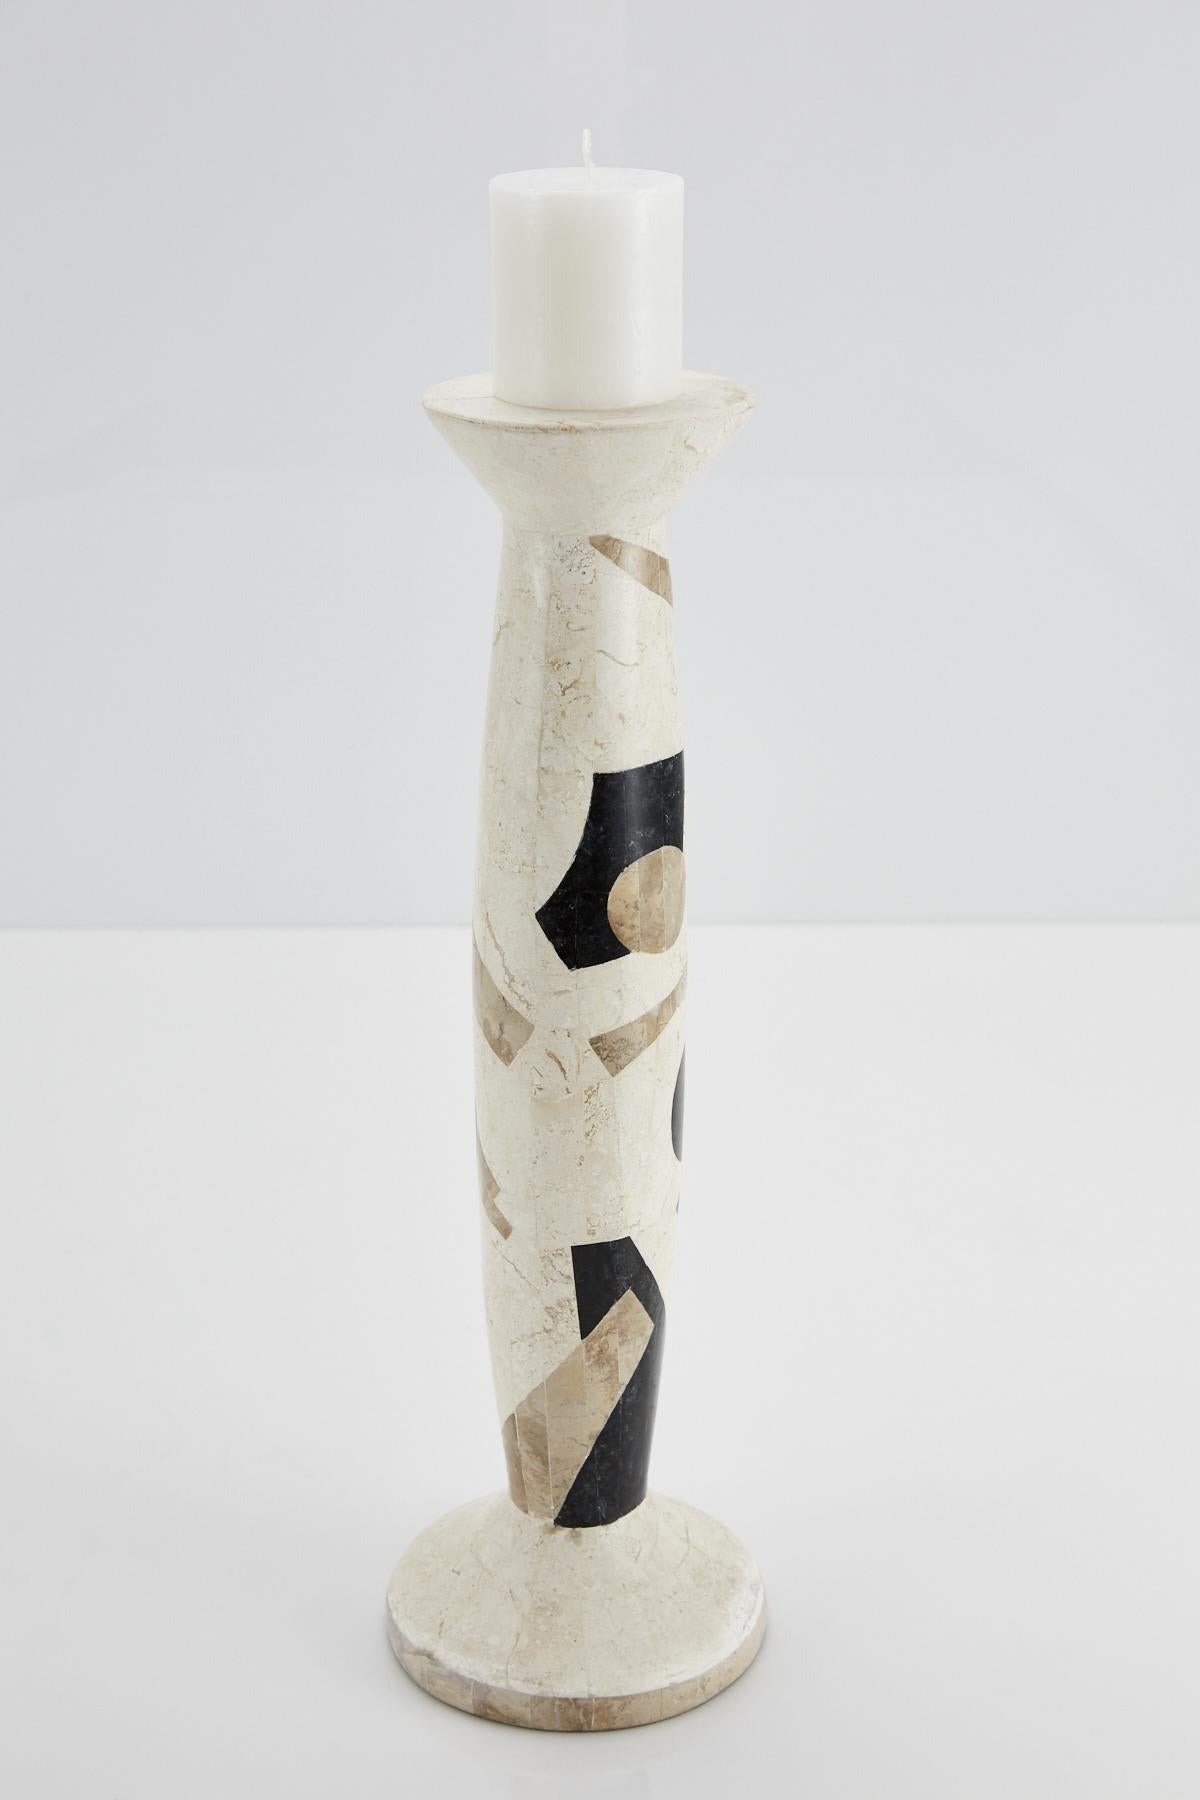 Tall pillar candleholder. Body is comprised of fiberglass with exterior completely covered in black, white and beige tessellated stone in a fun Postmodern pattern. 

All furnishings are made from 100% natural Fossil Stone or Seashell inlay,